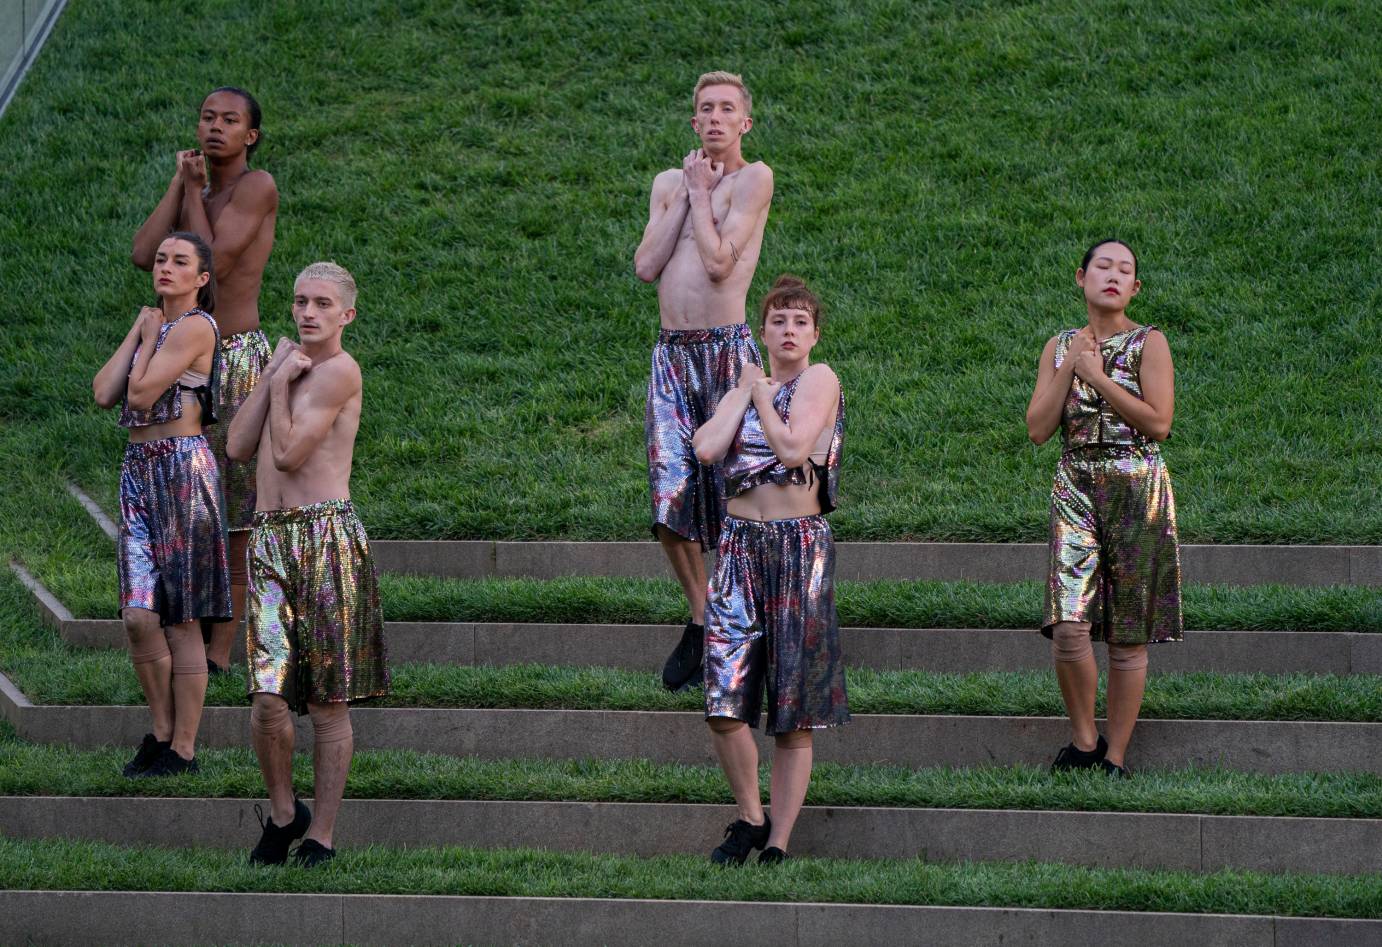 Against a grassy mound, dancers in metallic fabrics clutch their hands to their chests